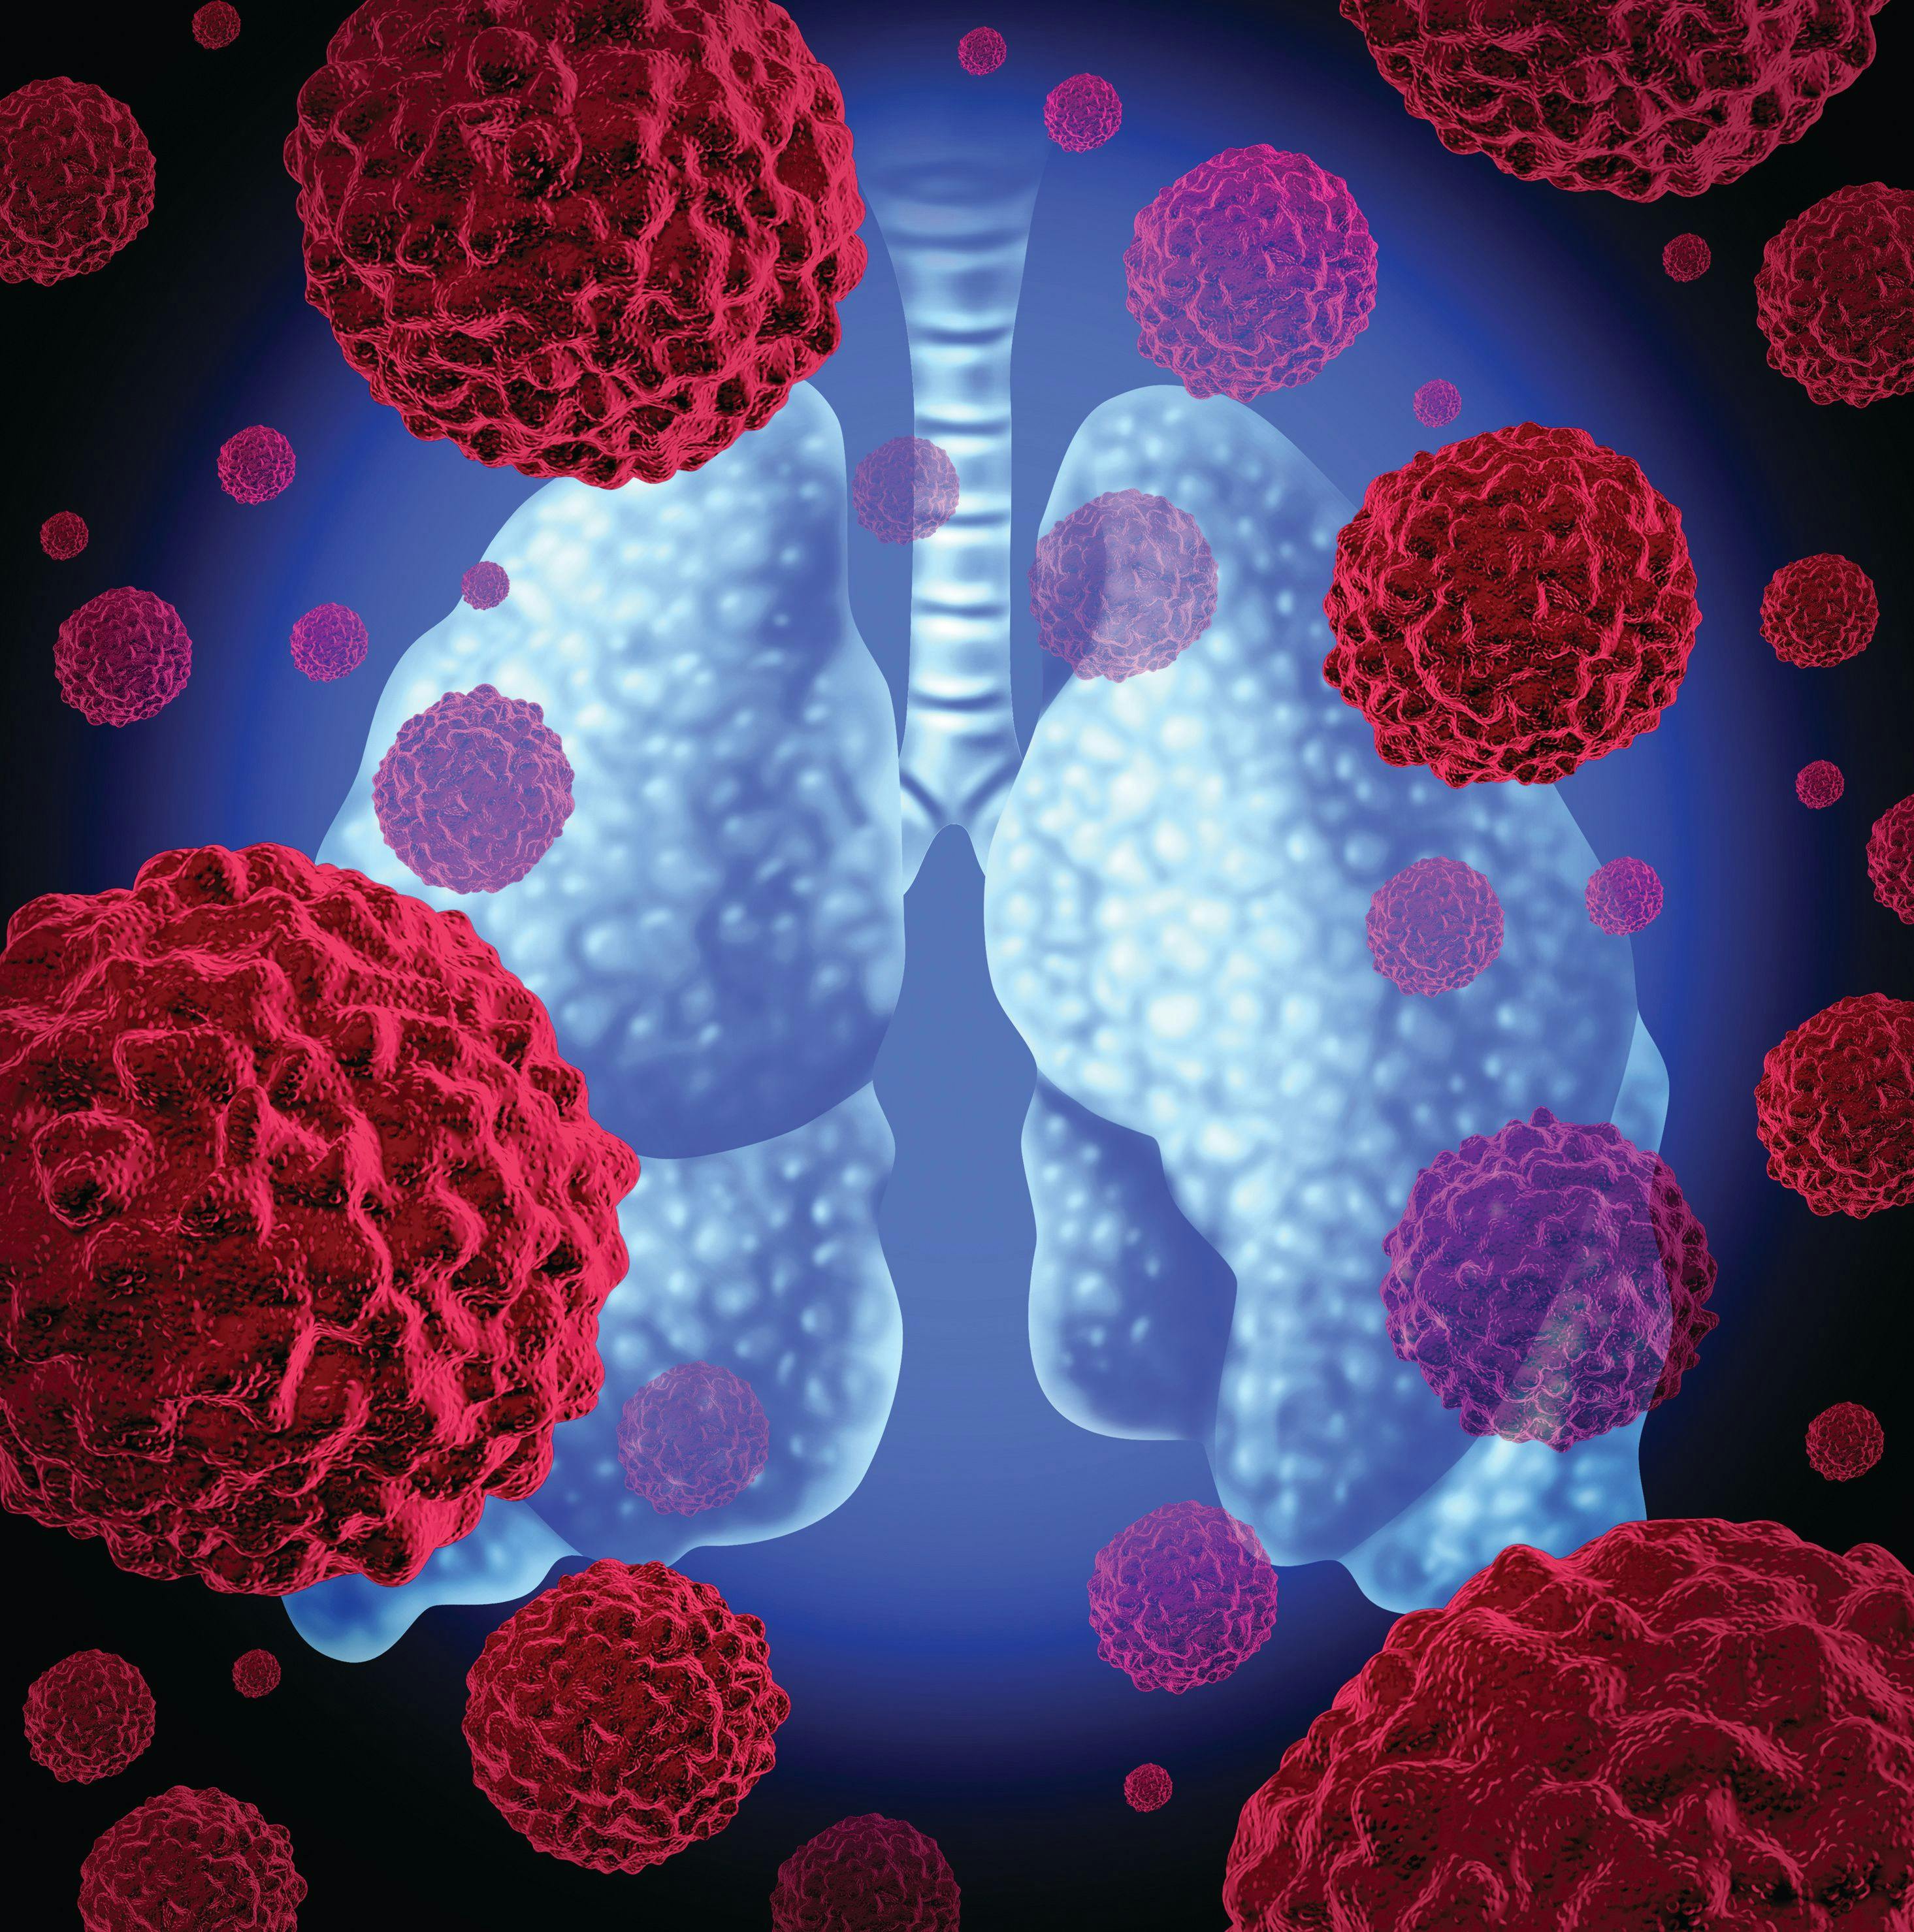  Pralsetinib Is Tolerable, Durable in RET Fusion+ NSCLC